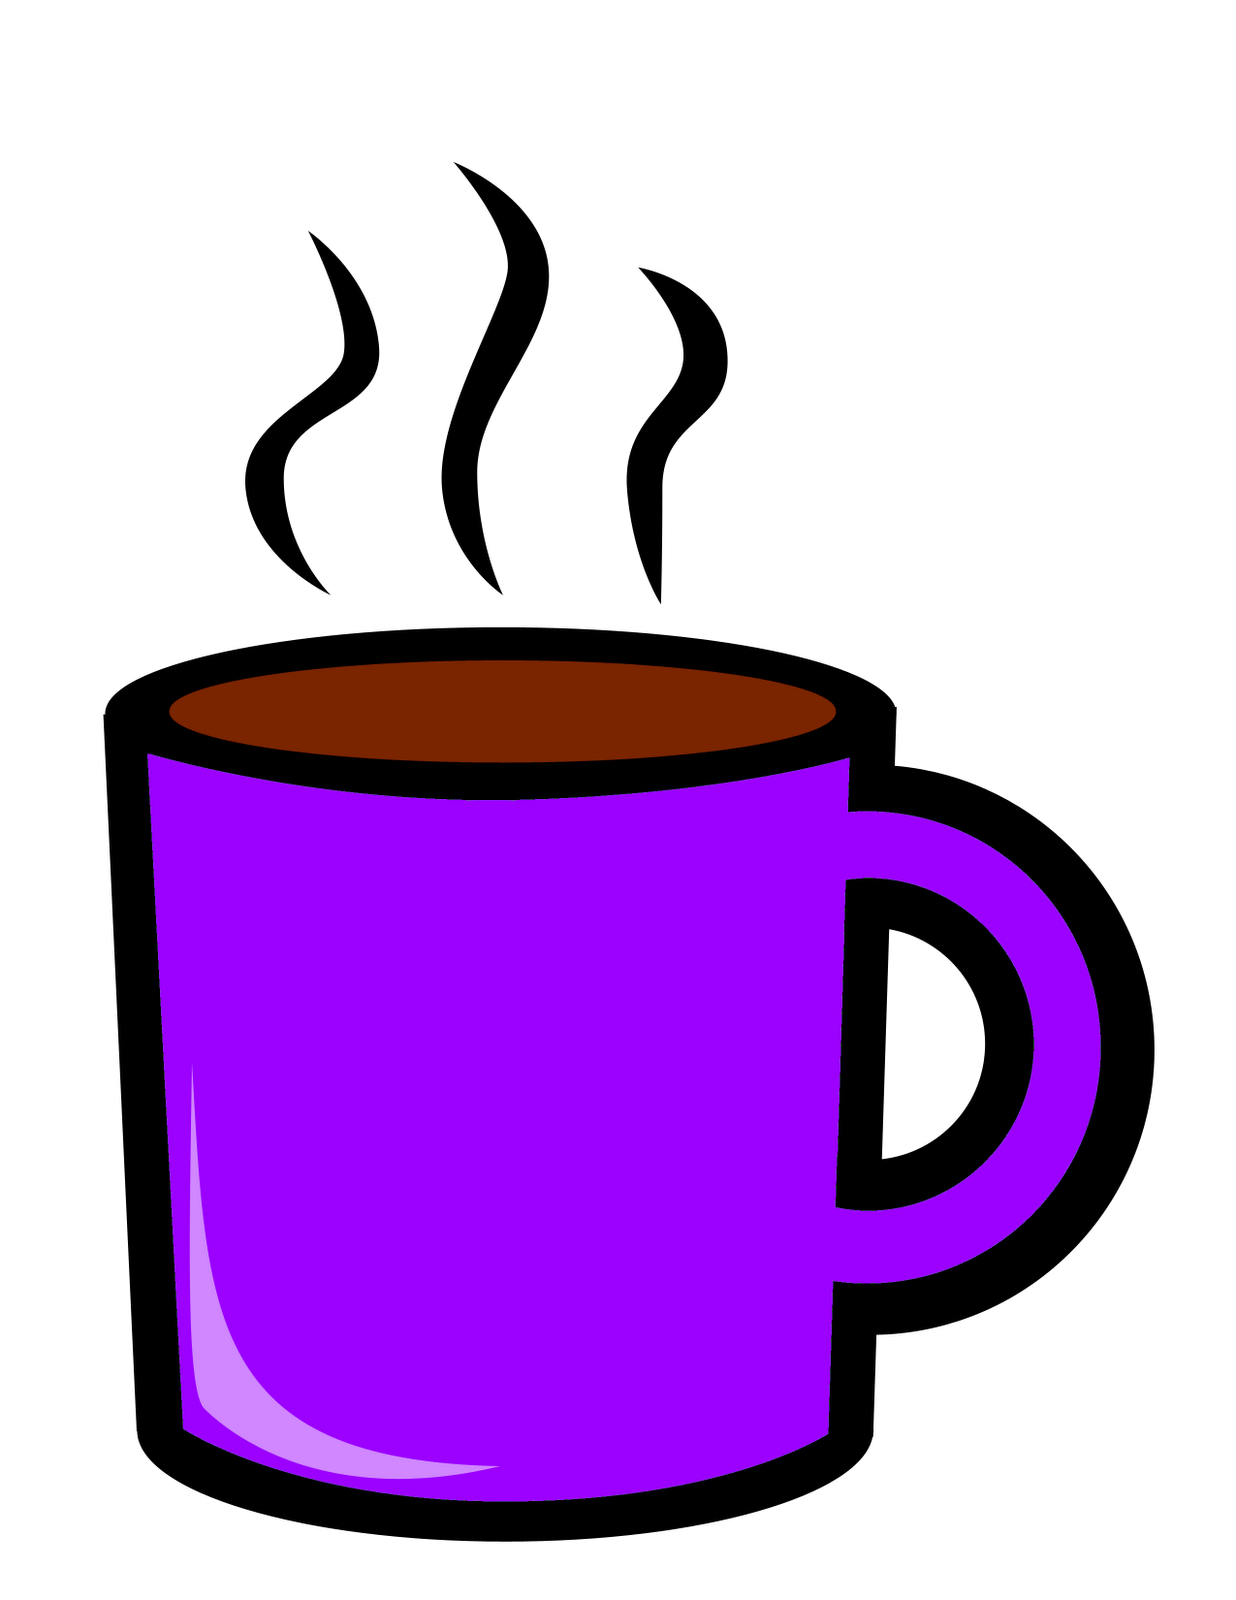 Cups of Hot Chocolate Clipart 